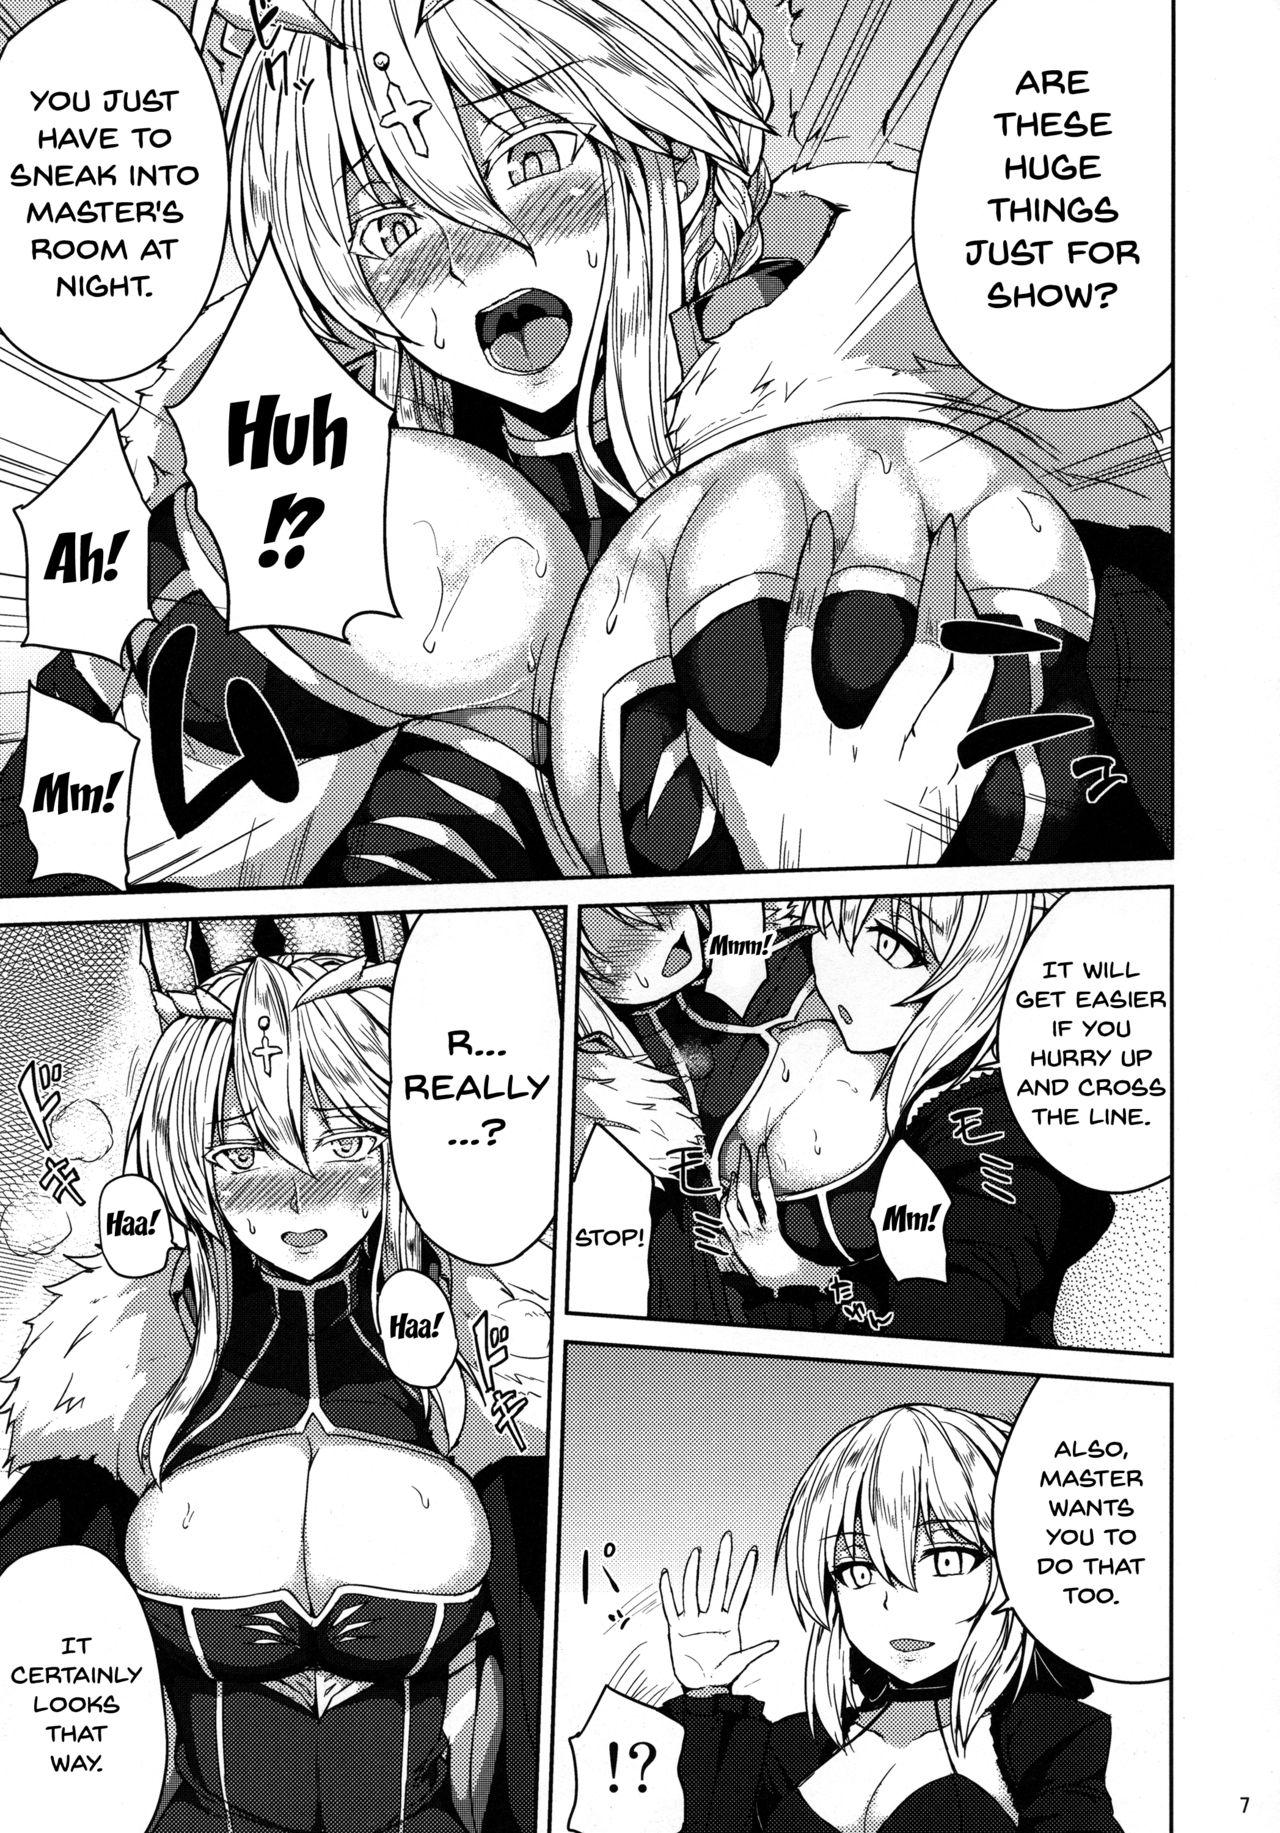 Anal Chichiue to Ichaicha Shitai! | I Want To Fuck Those Giant Breasts! - Fate grand order Gay Theresome - Page 5